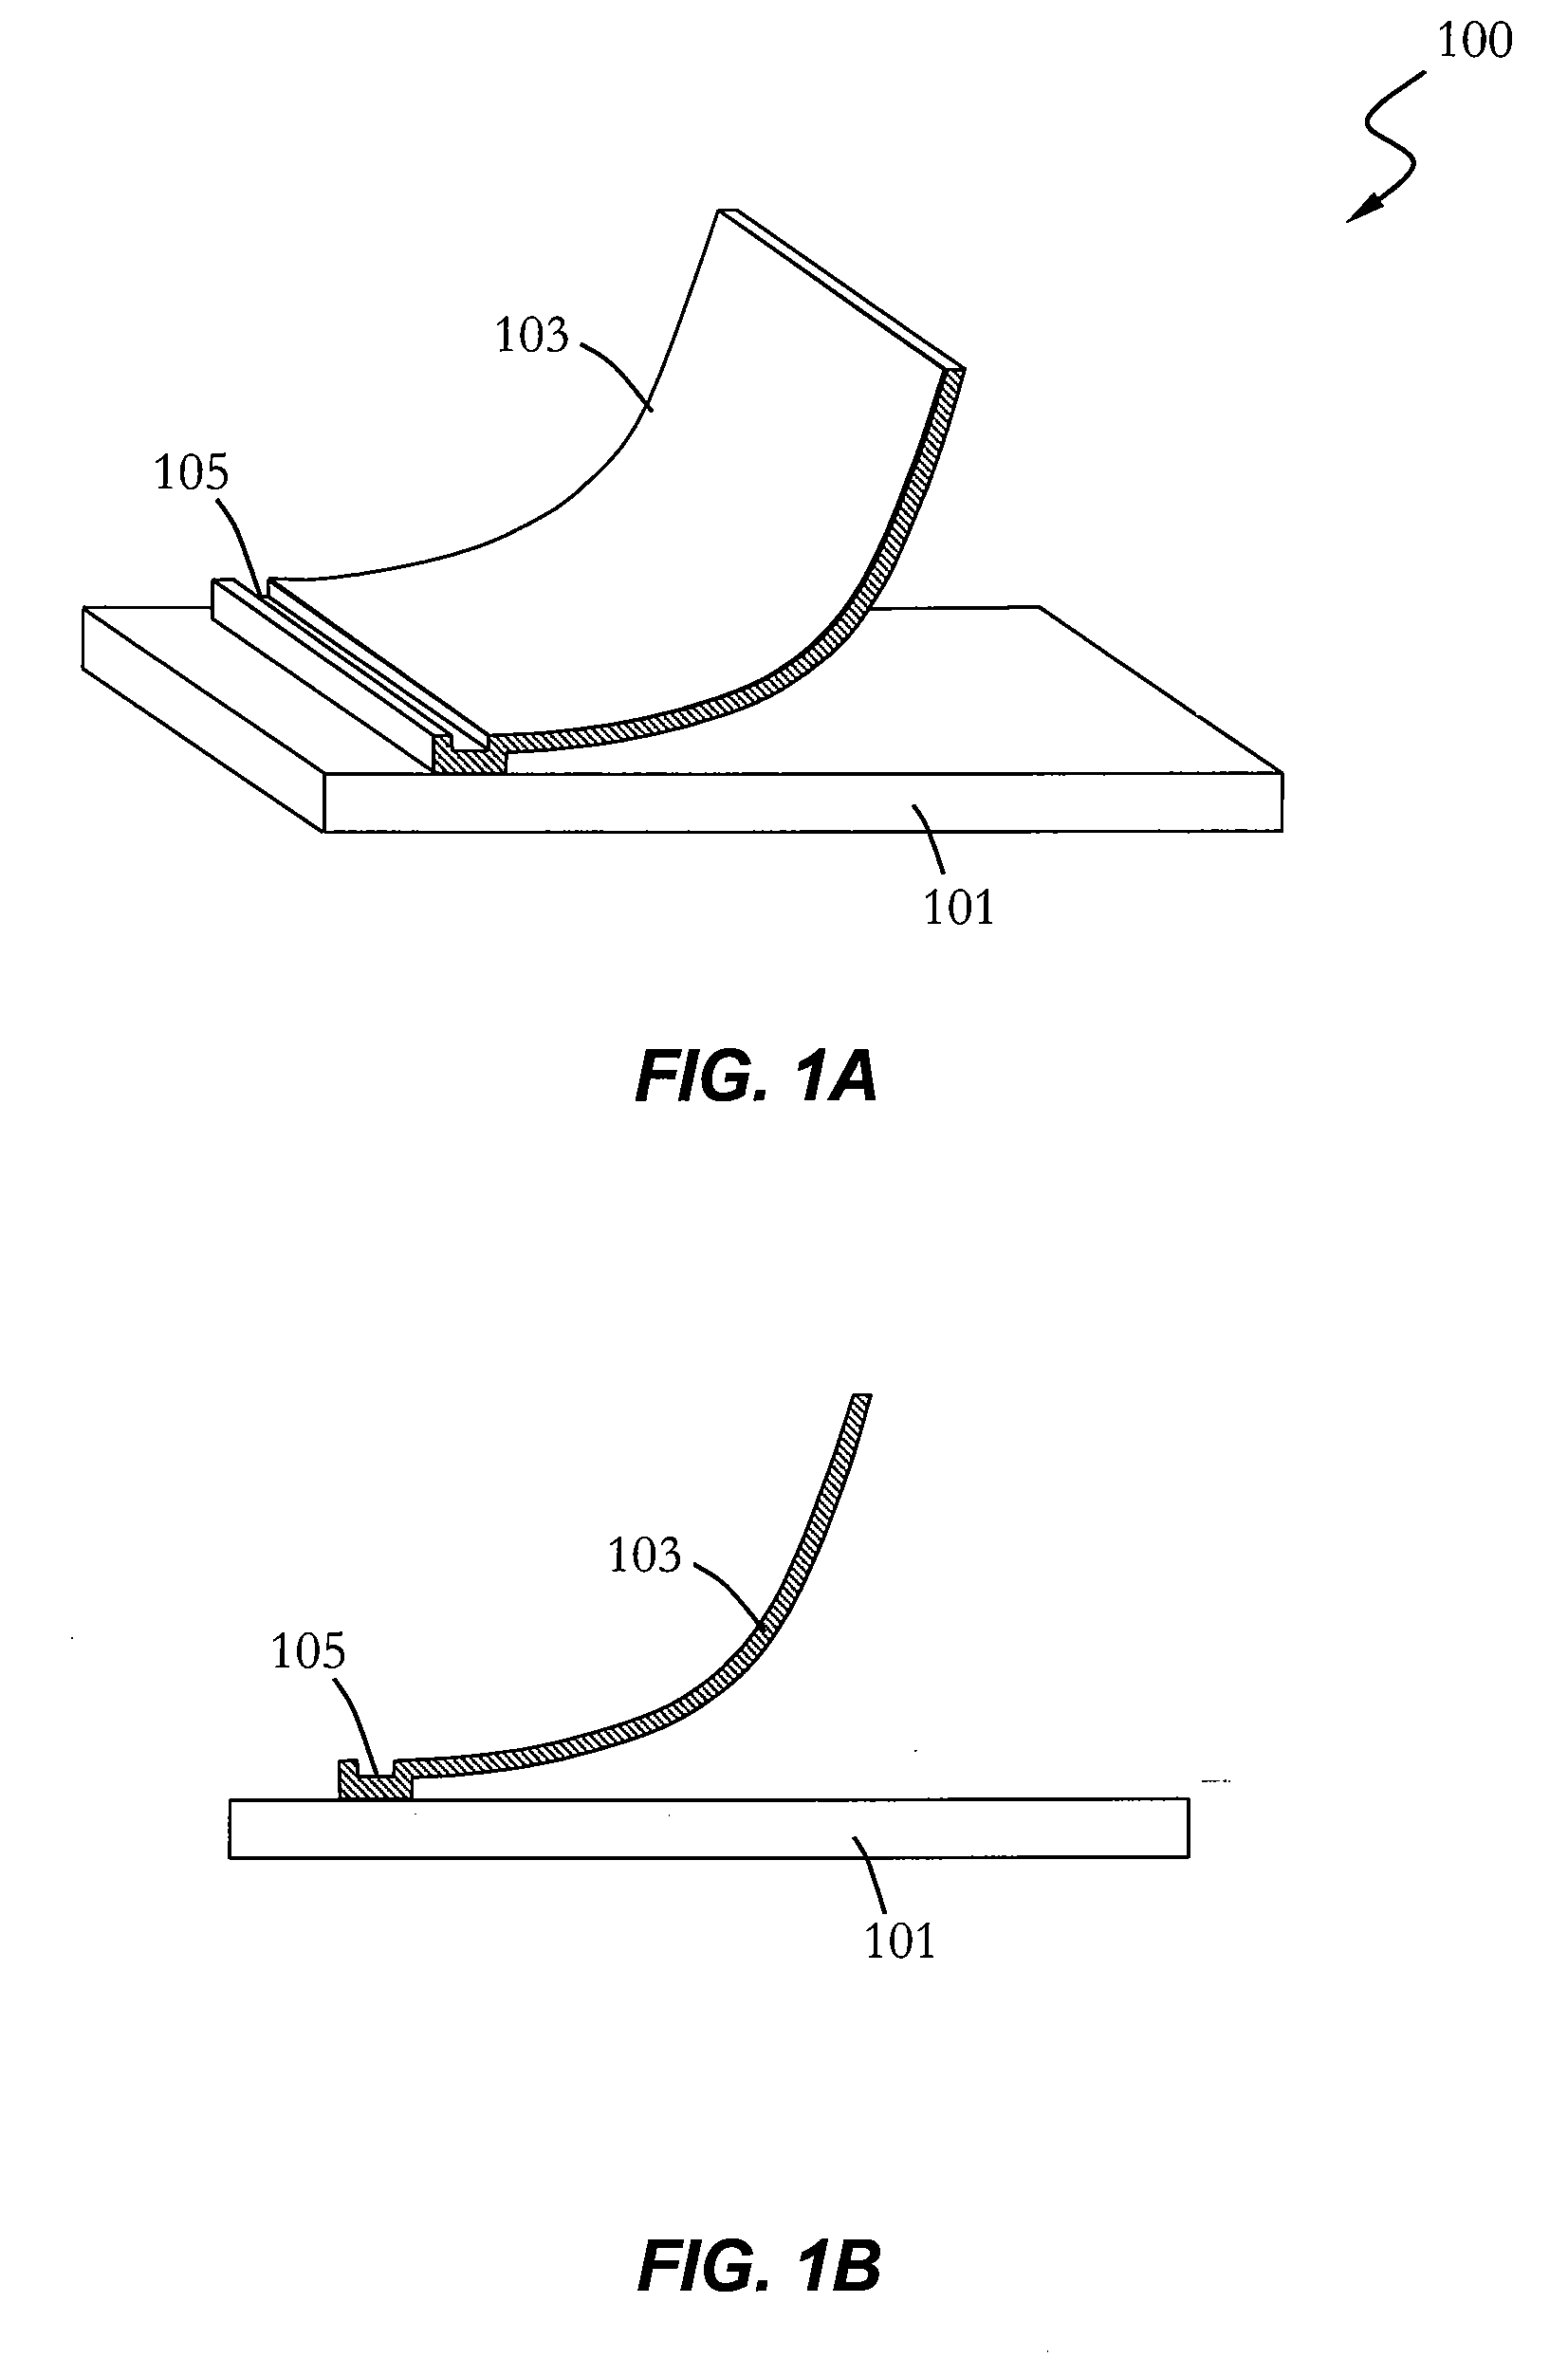 Method and Structure for an Out-of-Plane Compliant Micro Actuator